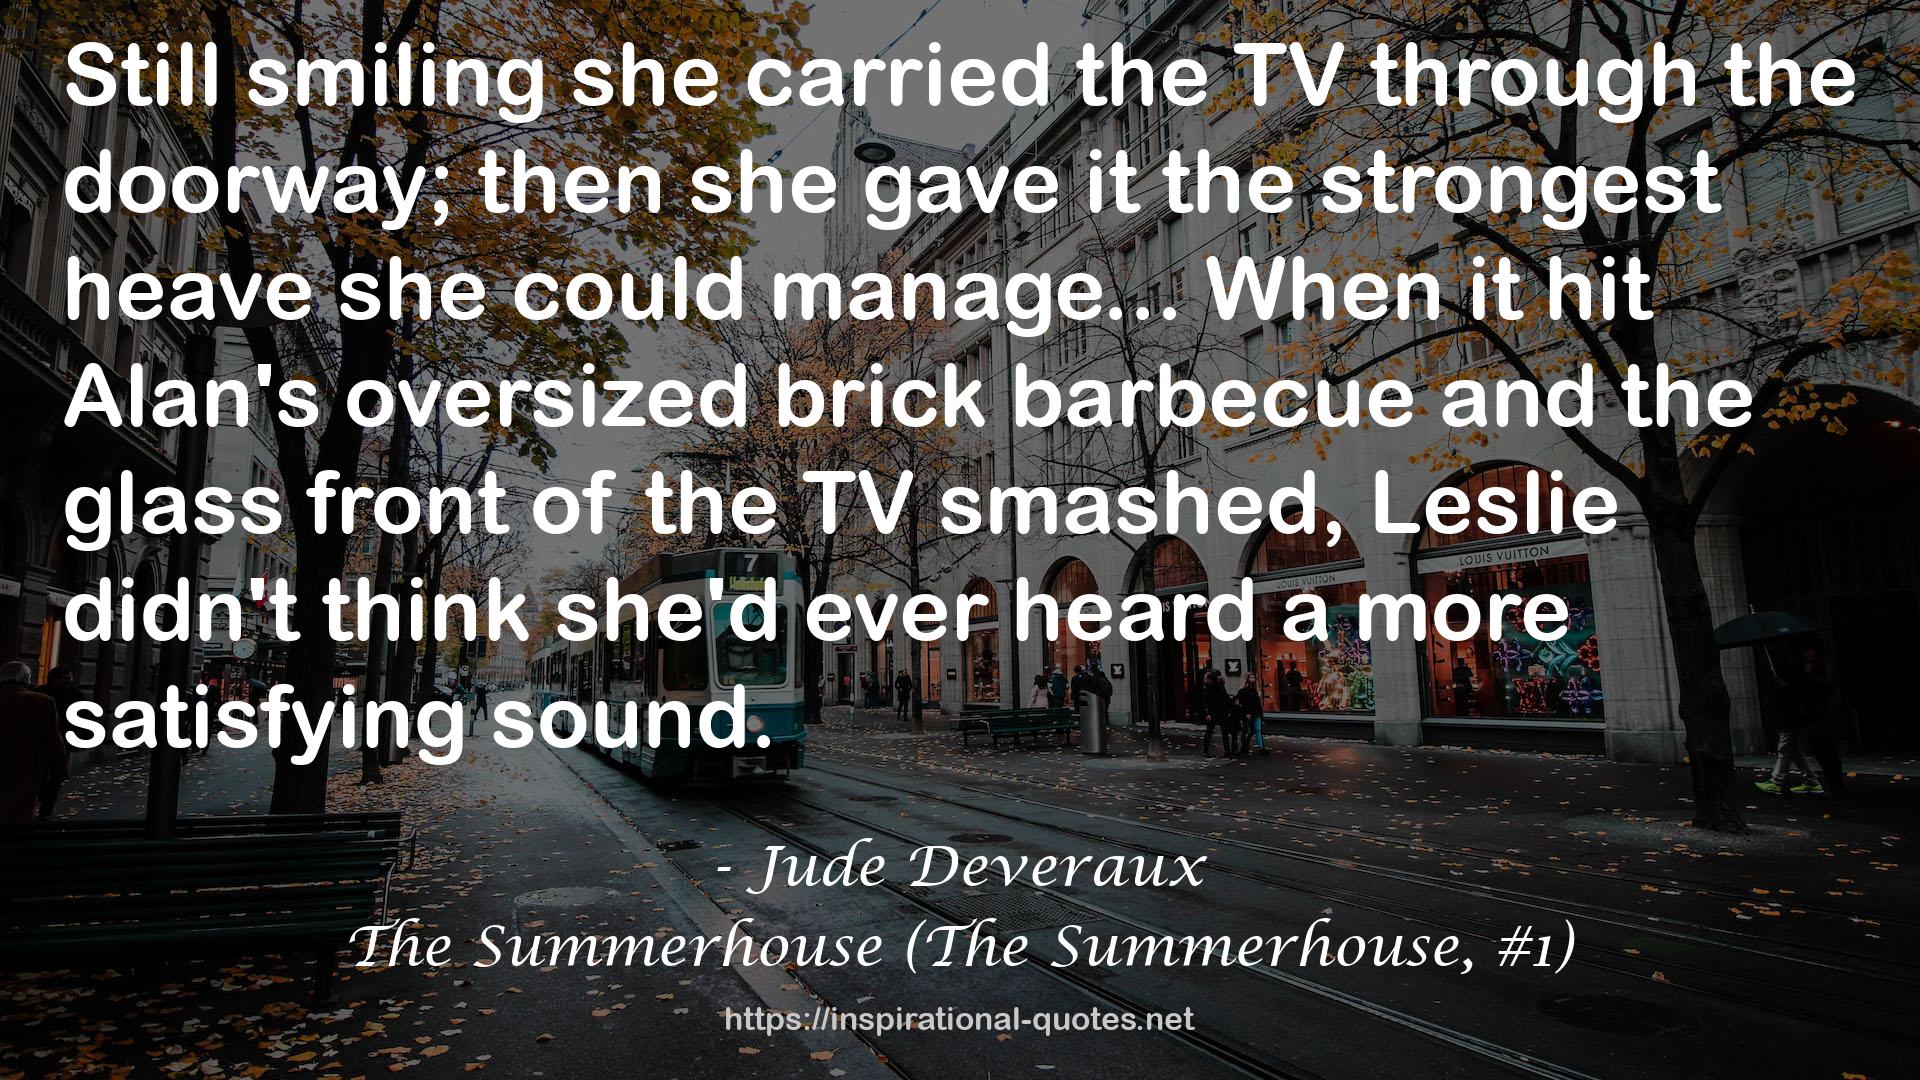 The Summerhouse (The Summerhouse, #1) QUOTES